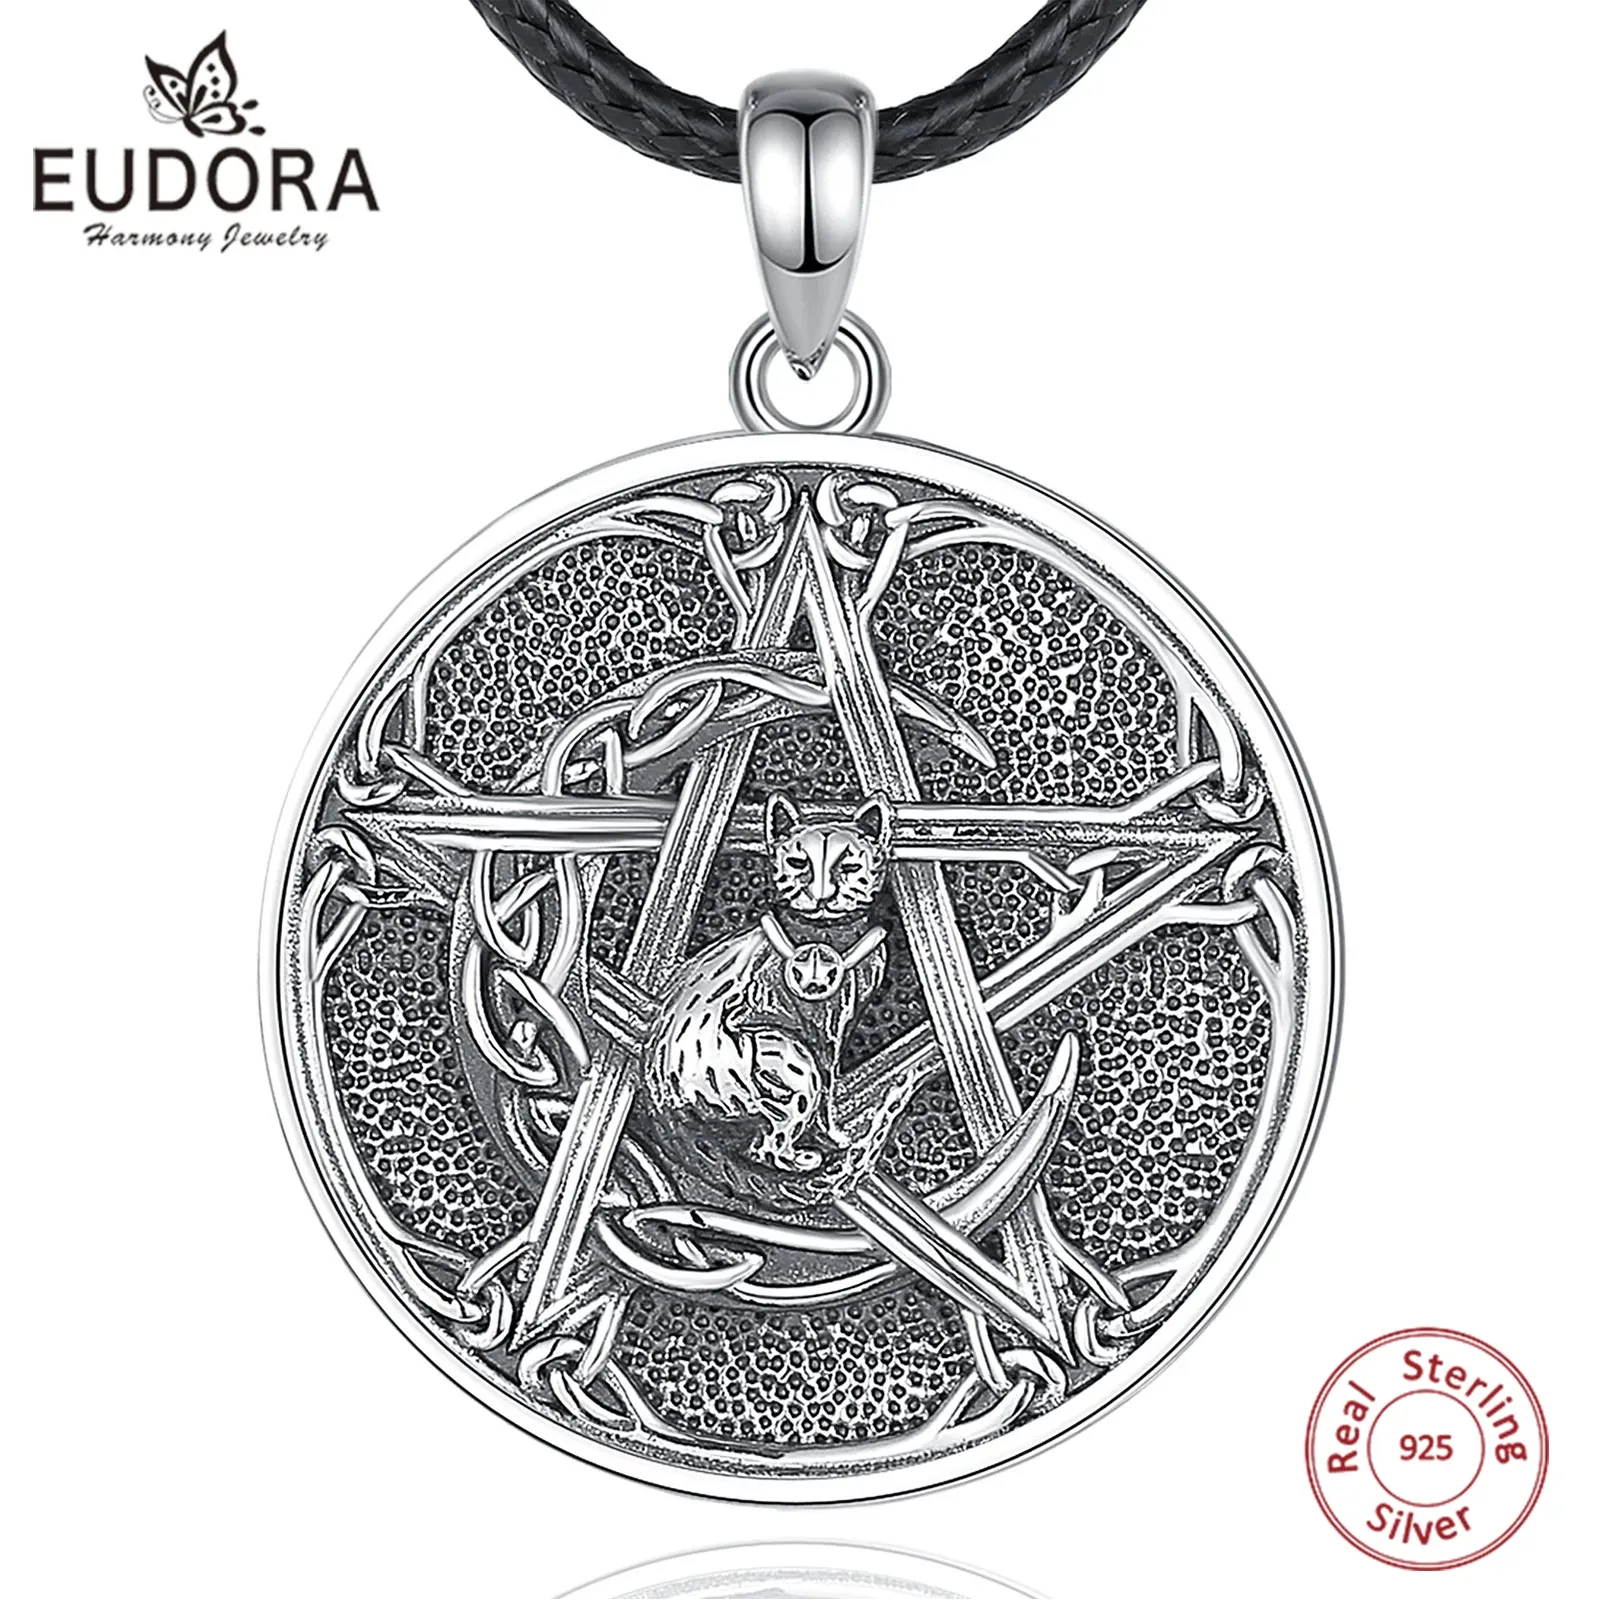 Halsband Eudora 925 Sterling Silver Pentagram Halsband Vintage Witch Knot Cat Amulet Pendant Witchcraft Jewelry Party Gift for Man Women Women